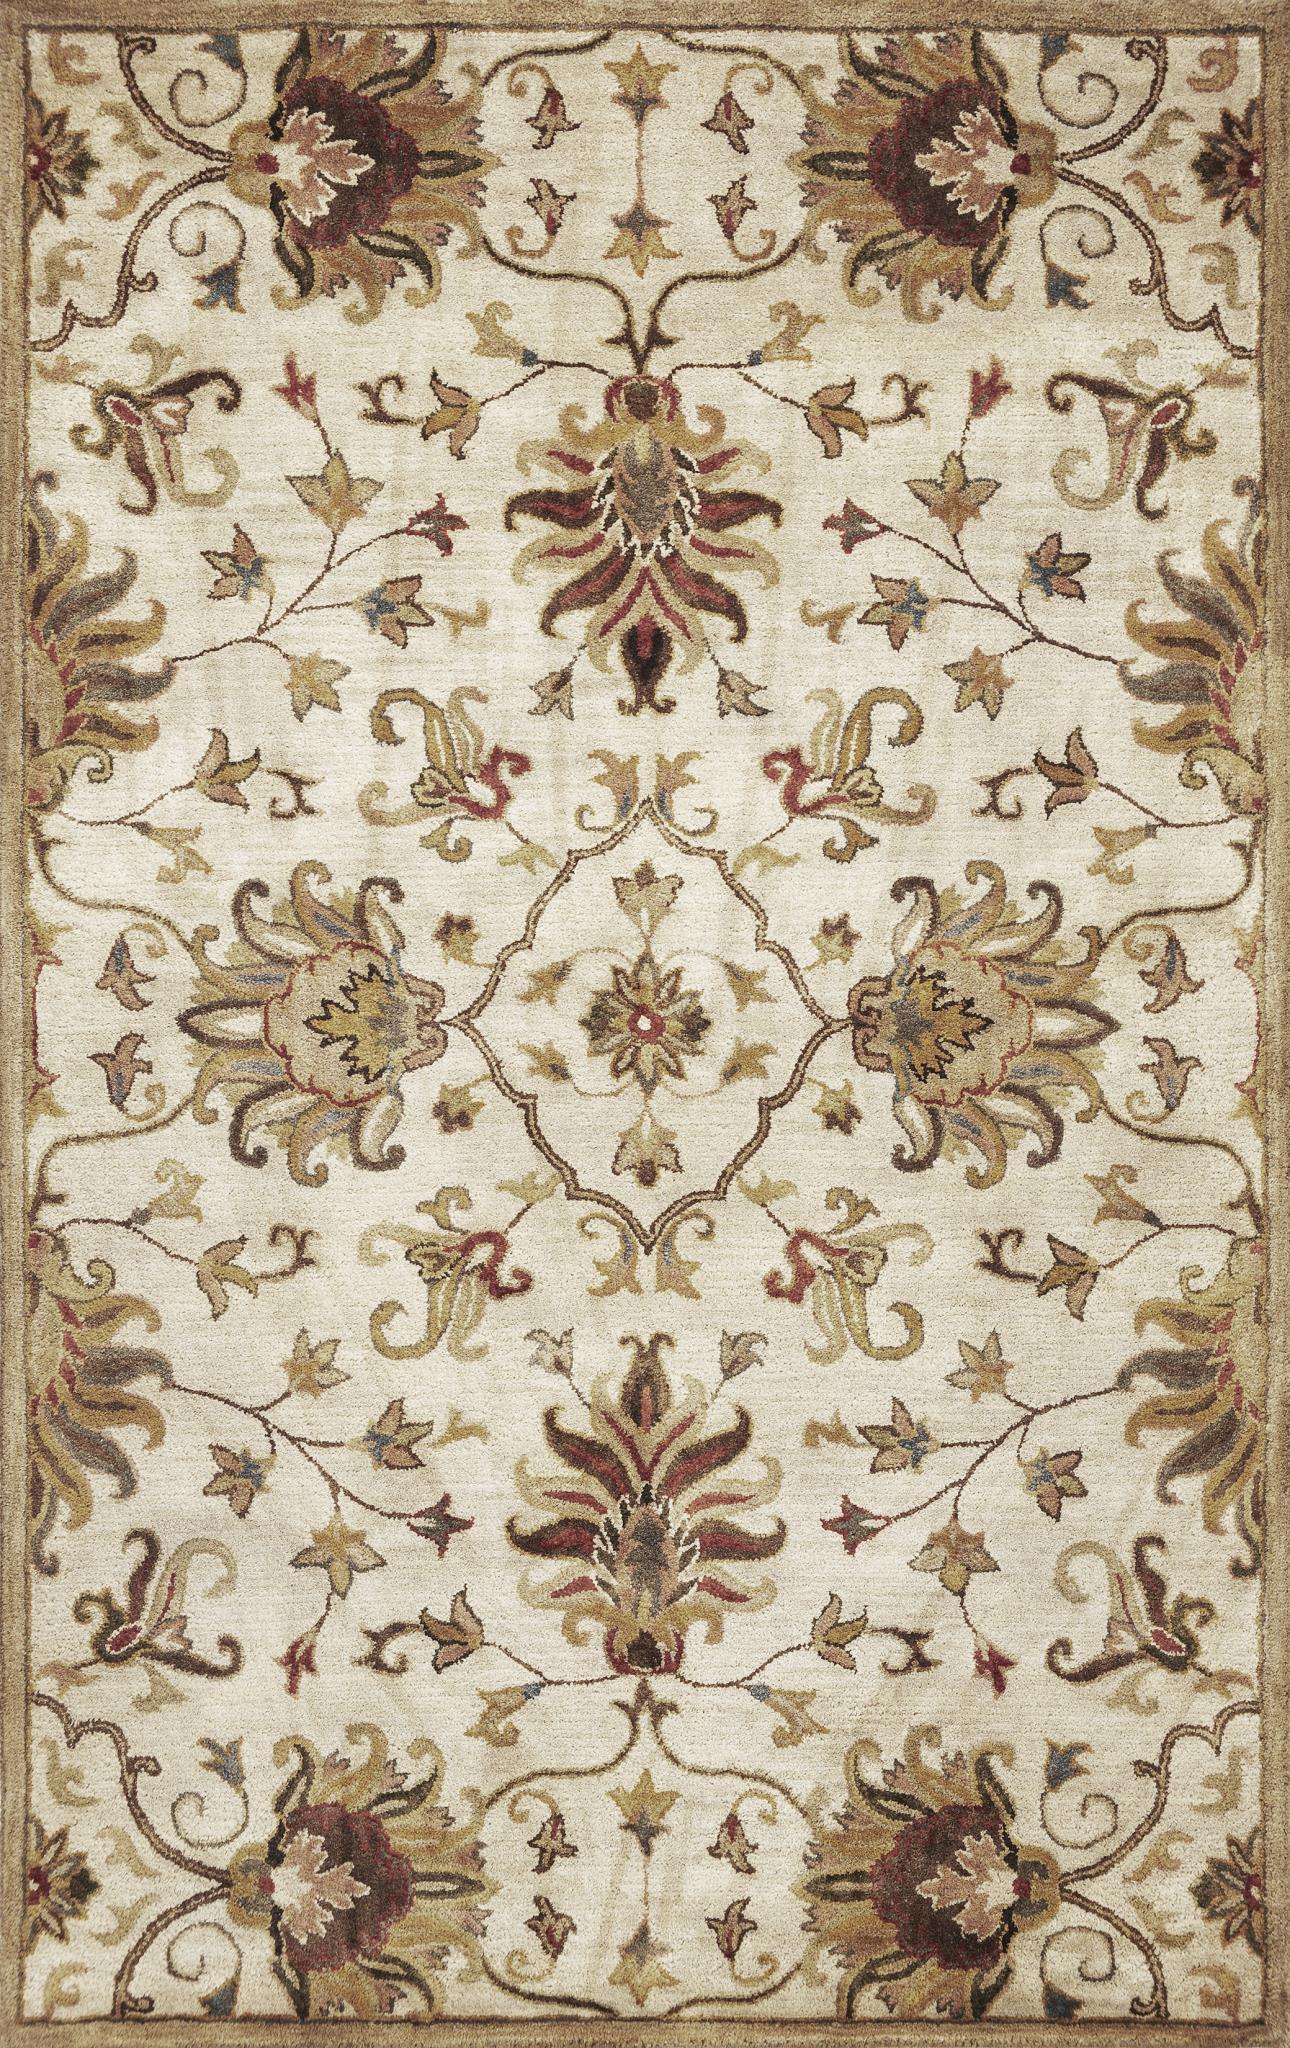 9' X 13' Beige Blue and Ivory Wool Floral Vines Hand Tufted Area Rug-375533-1